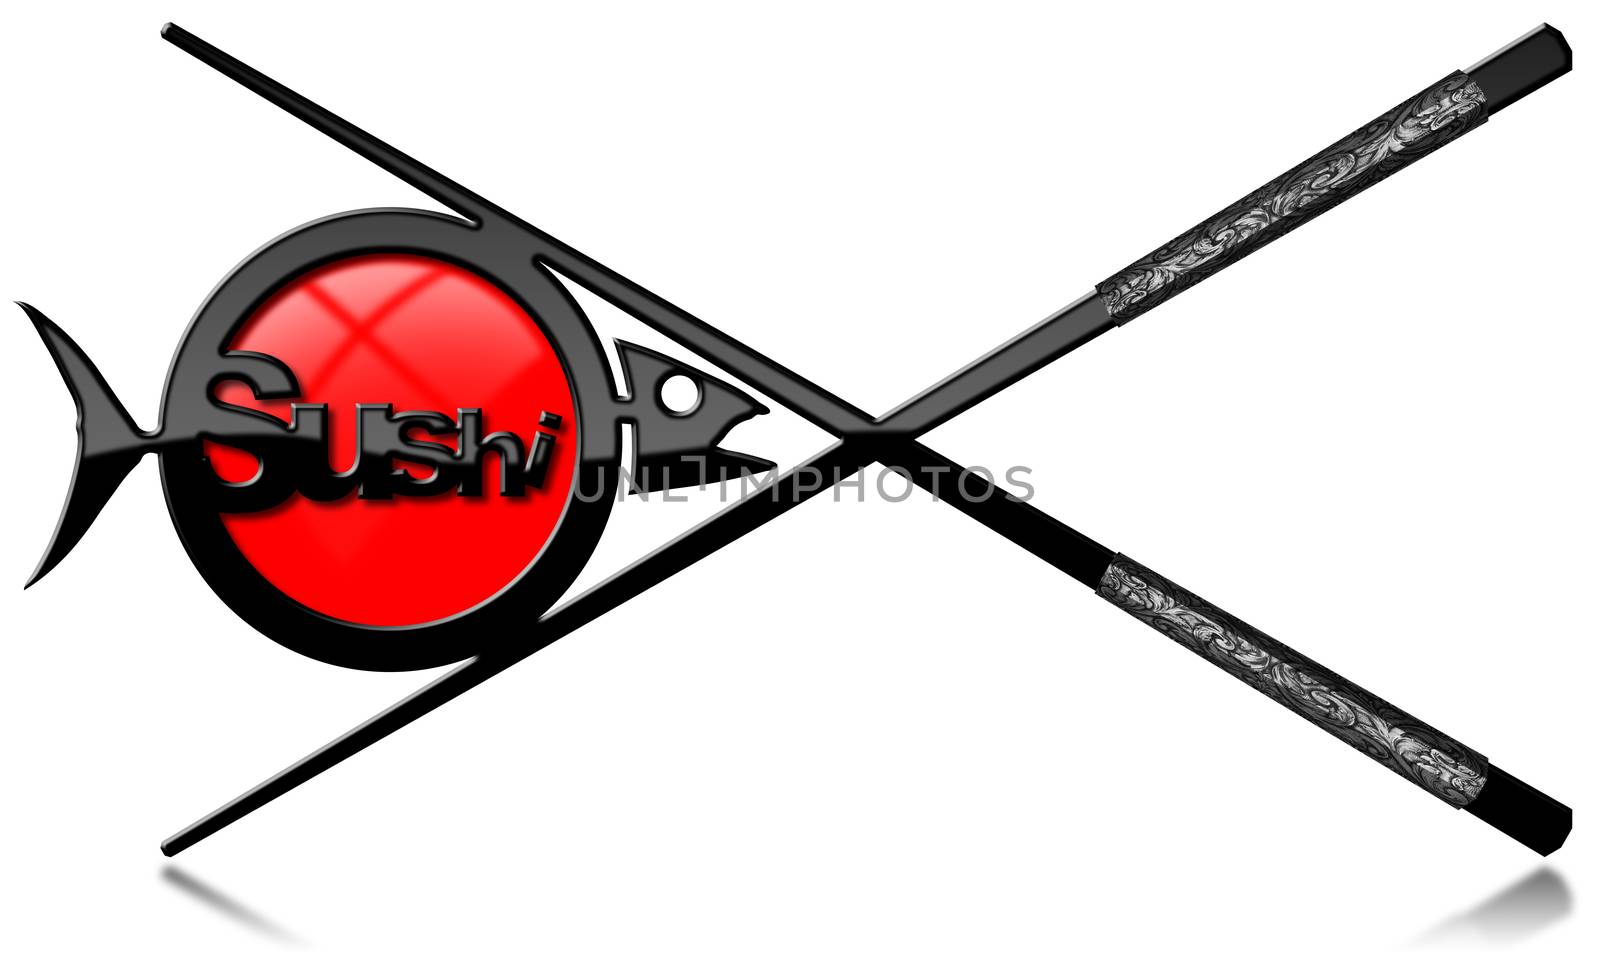 Sushi - Black Red and Silver Symbol by catalby